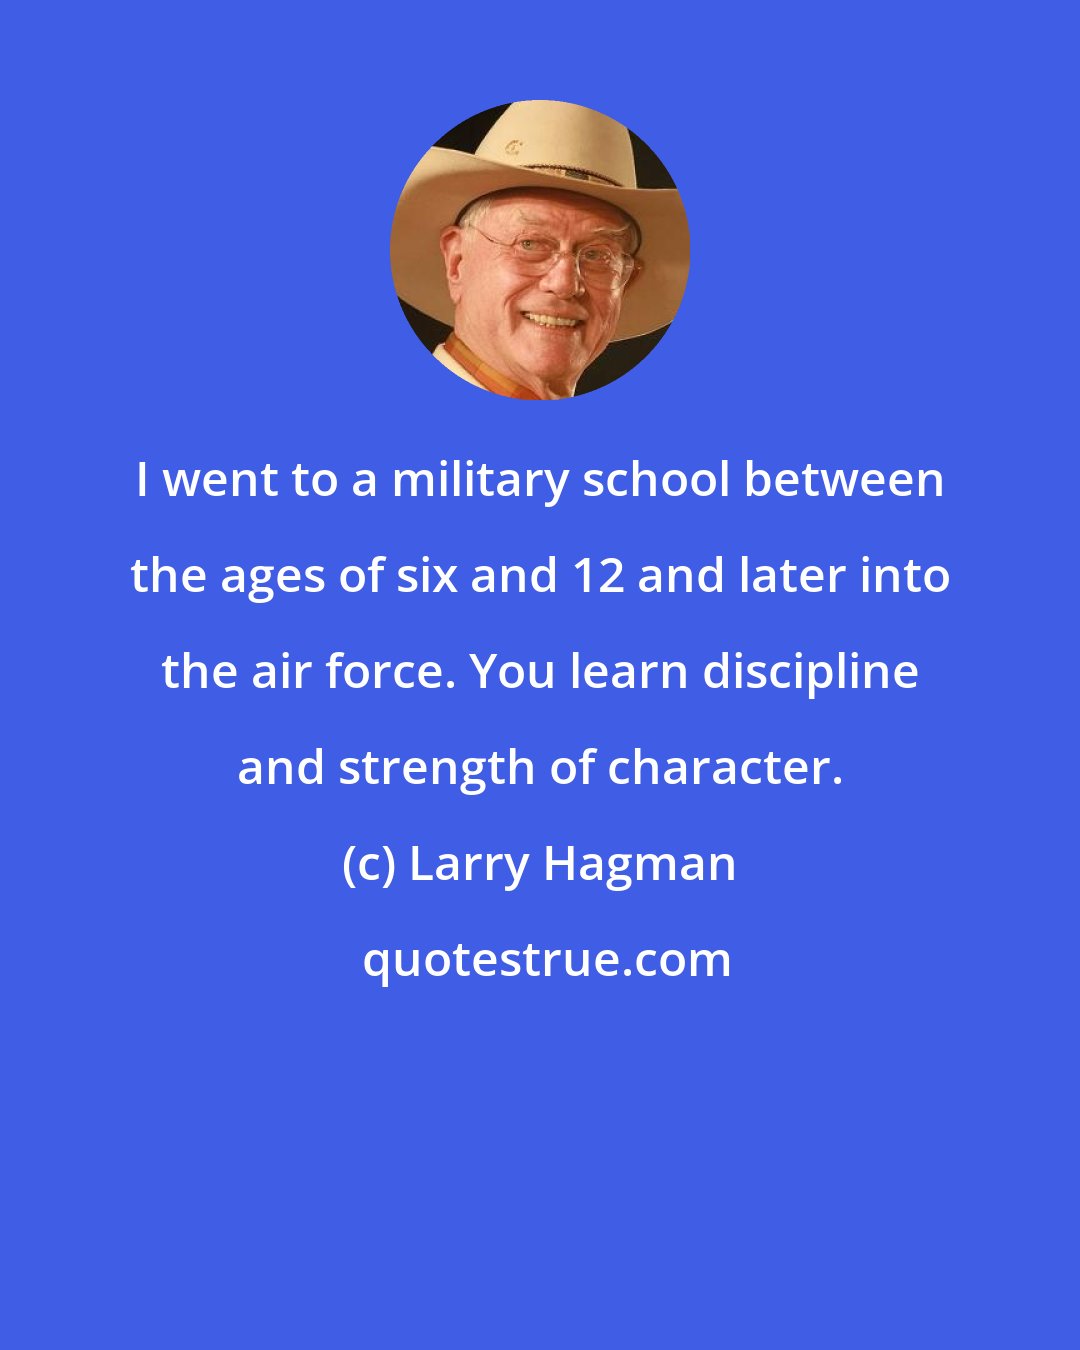 Larry Hagman: I went to a military school between the ages of six and 12 and later into the air force. You learn discipline and strength of character.